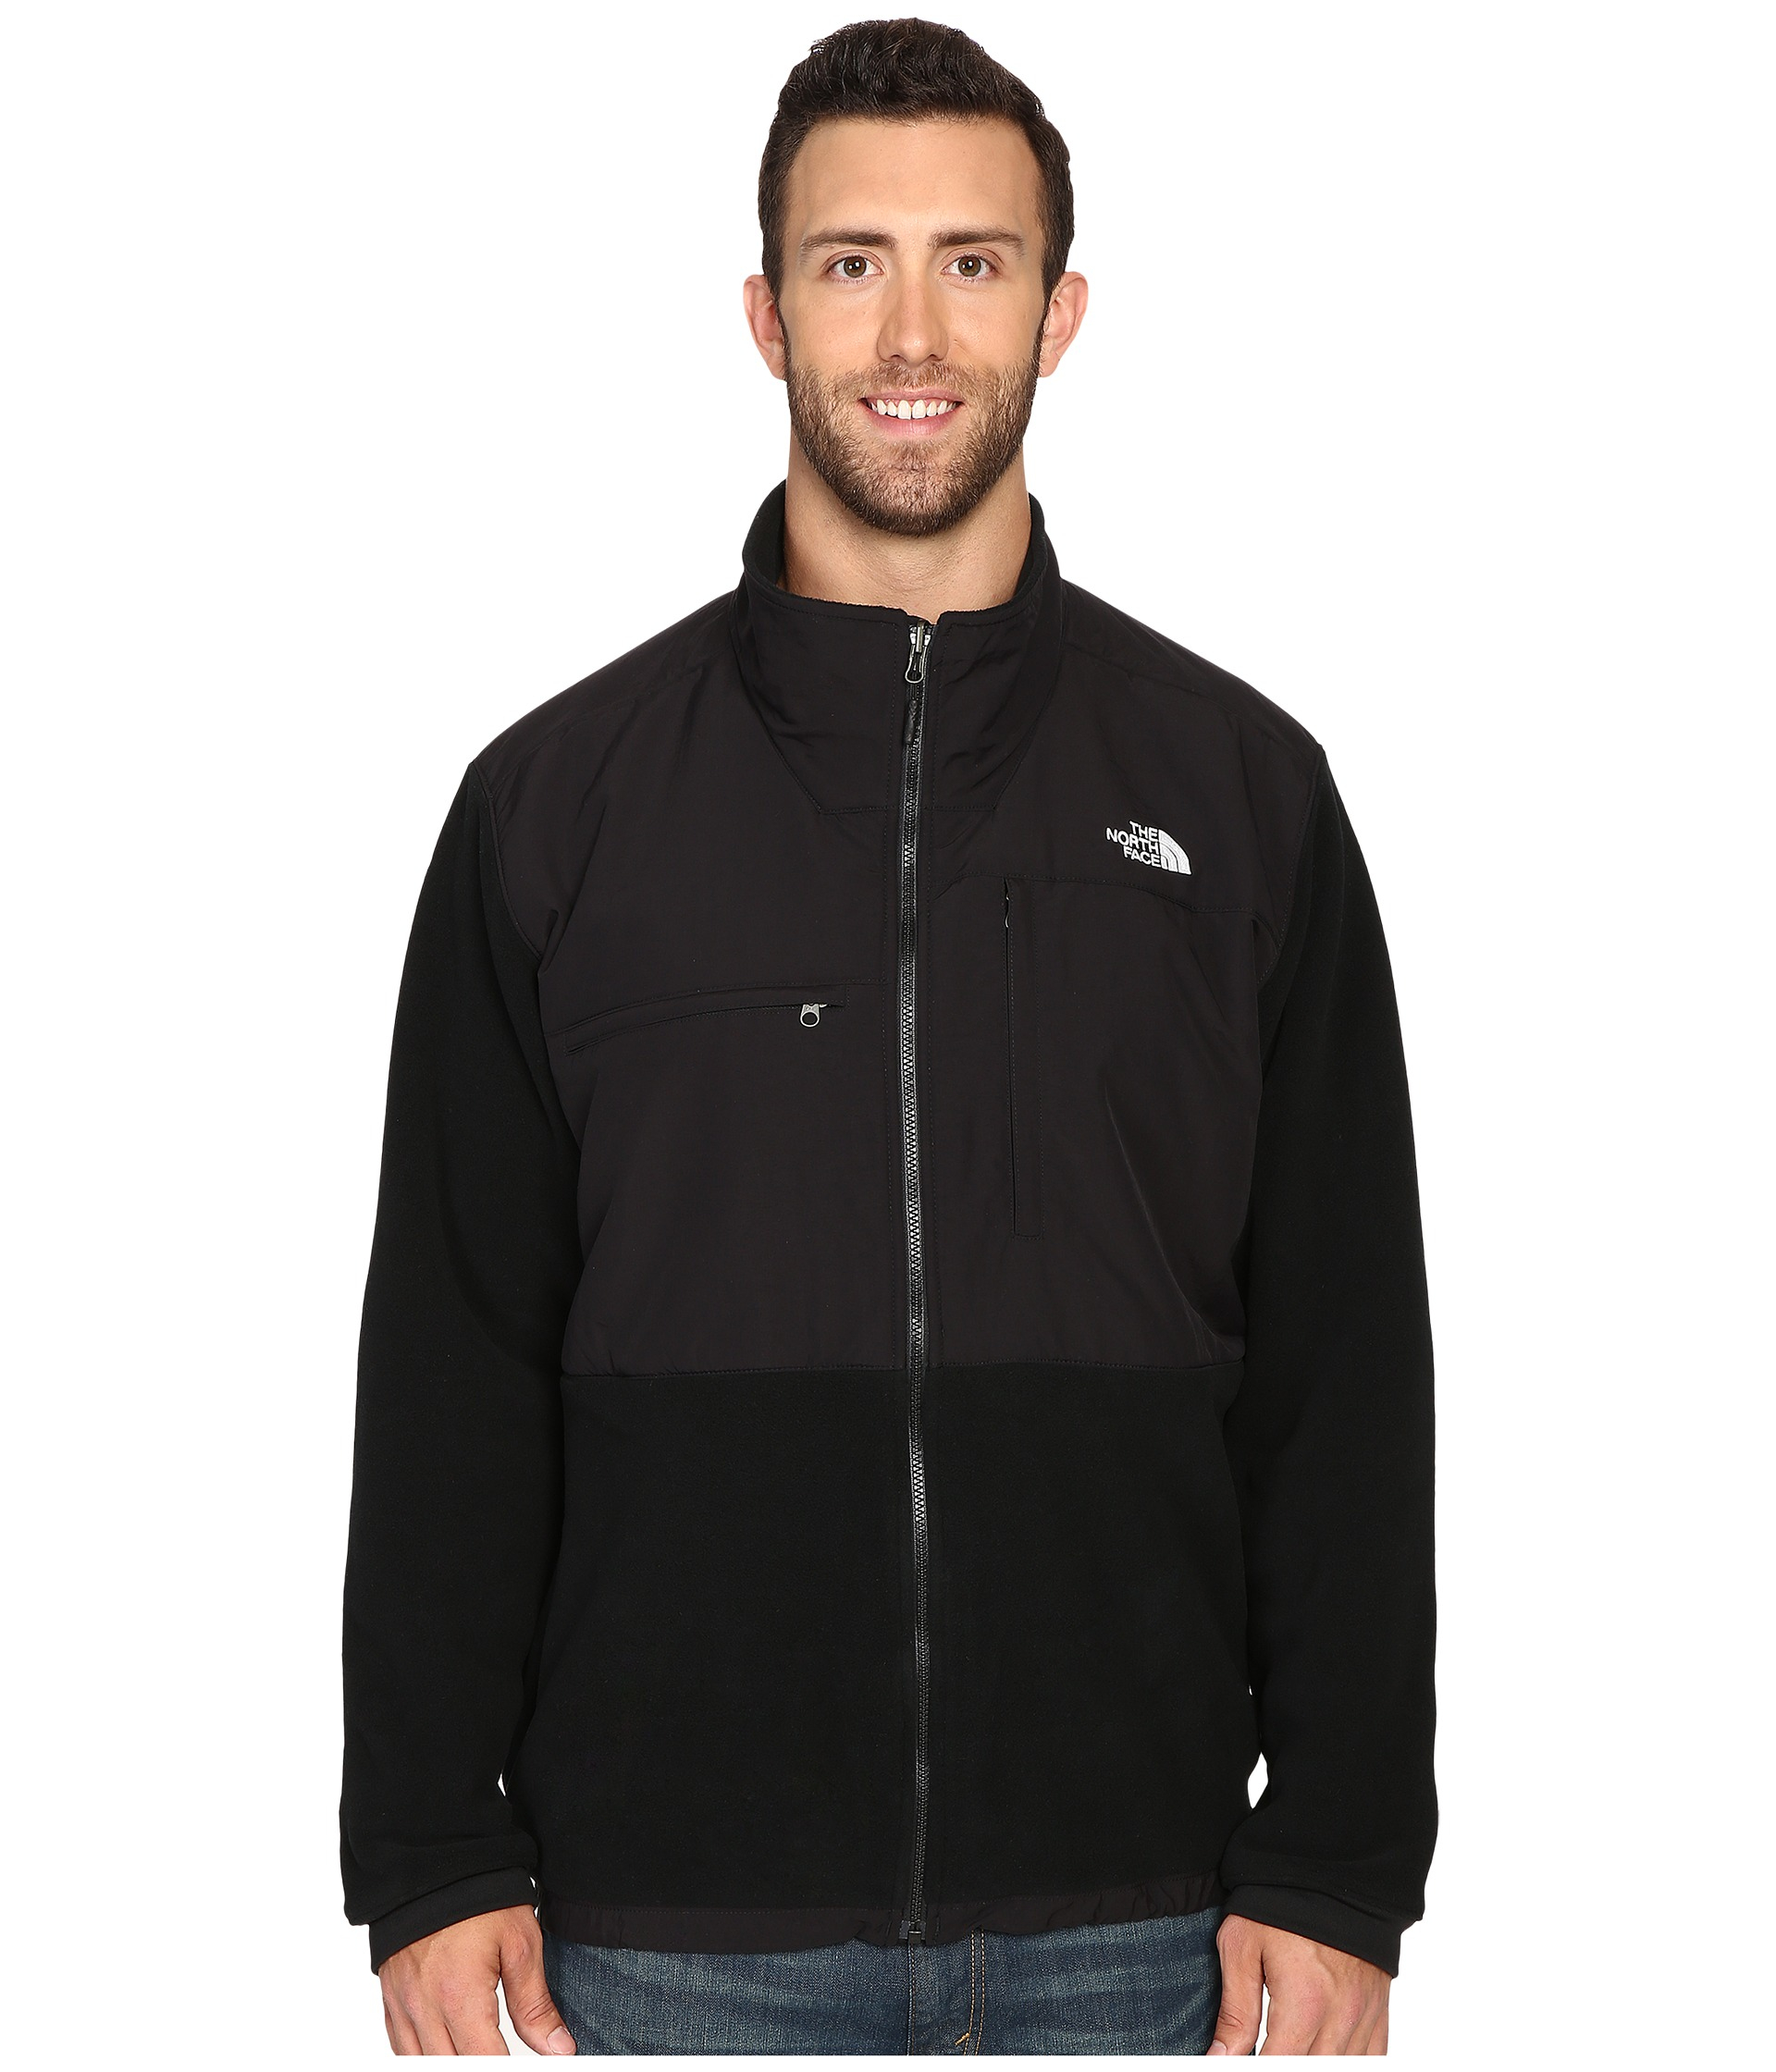 Lyst - The North Face Denali 2 Jacket 3xl for Men